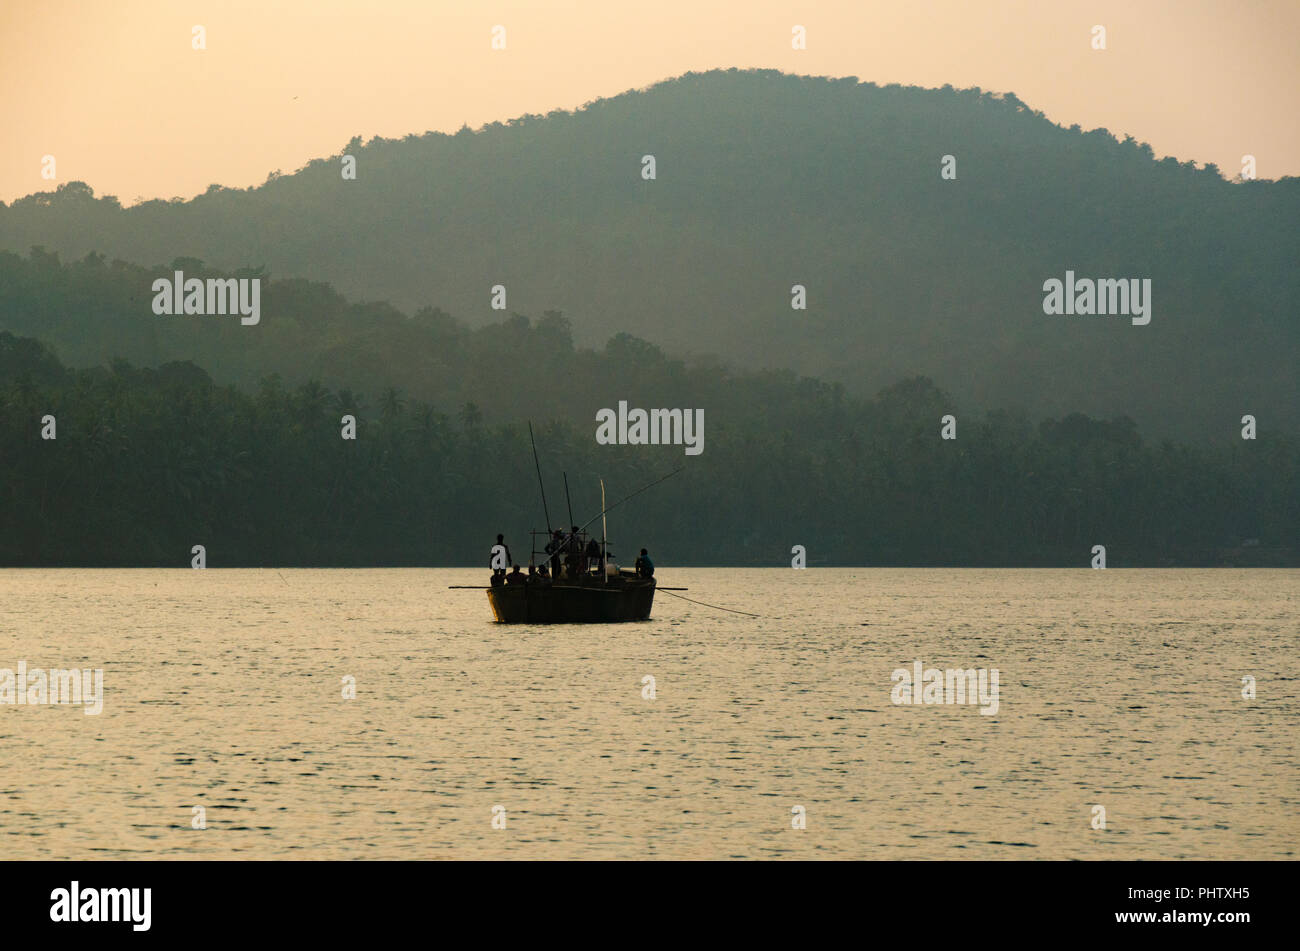 A lone sand extraction boat working at dusk on the Mandovi River near Volvoi, Goa, India Stock Photo